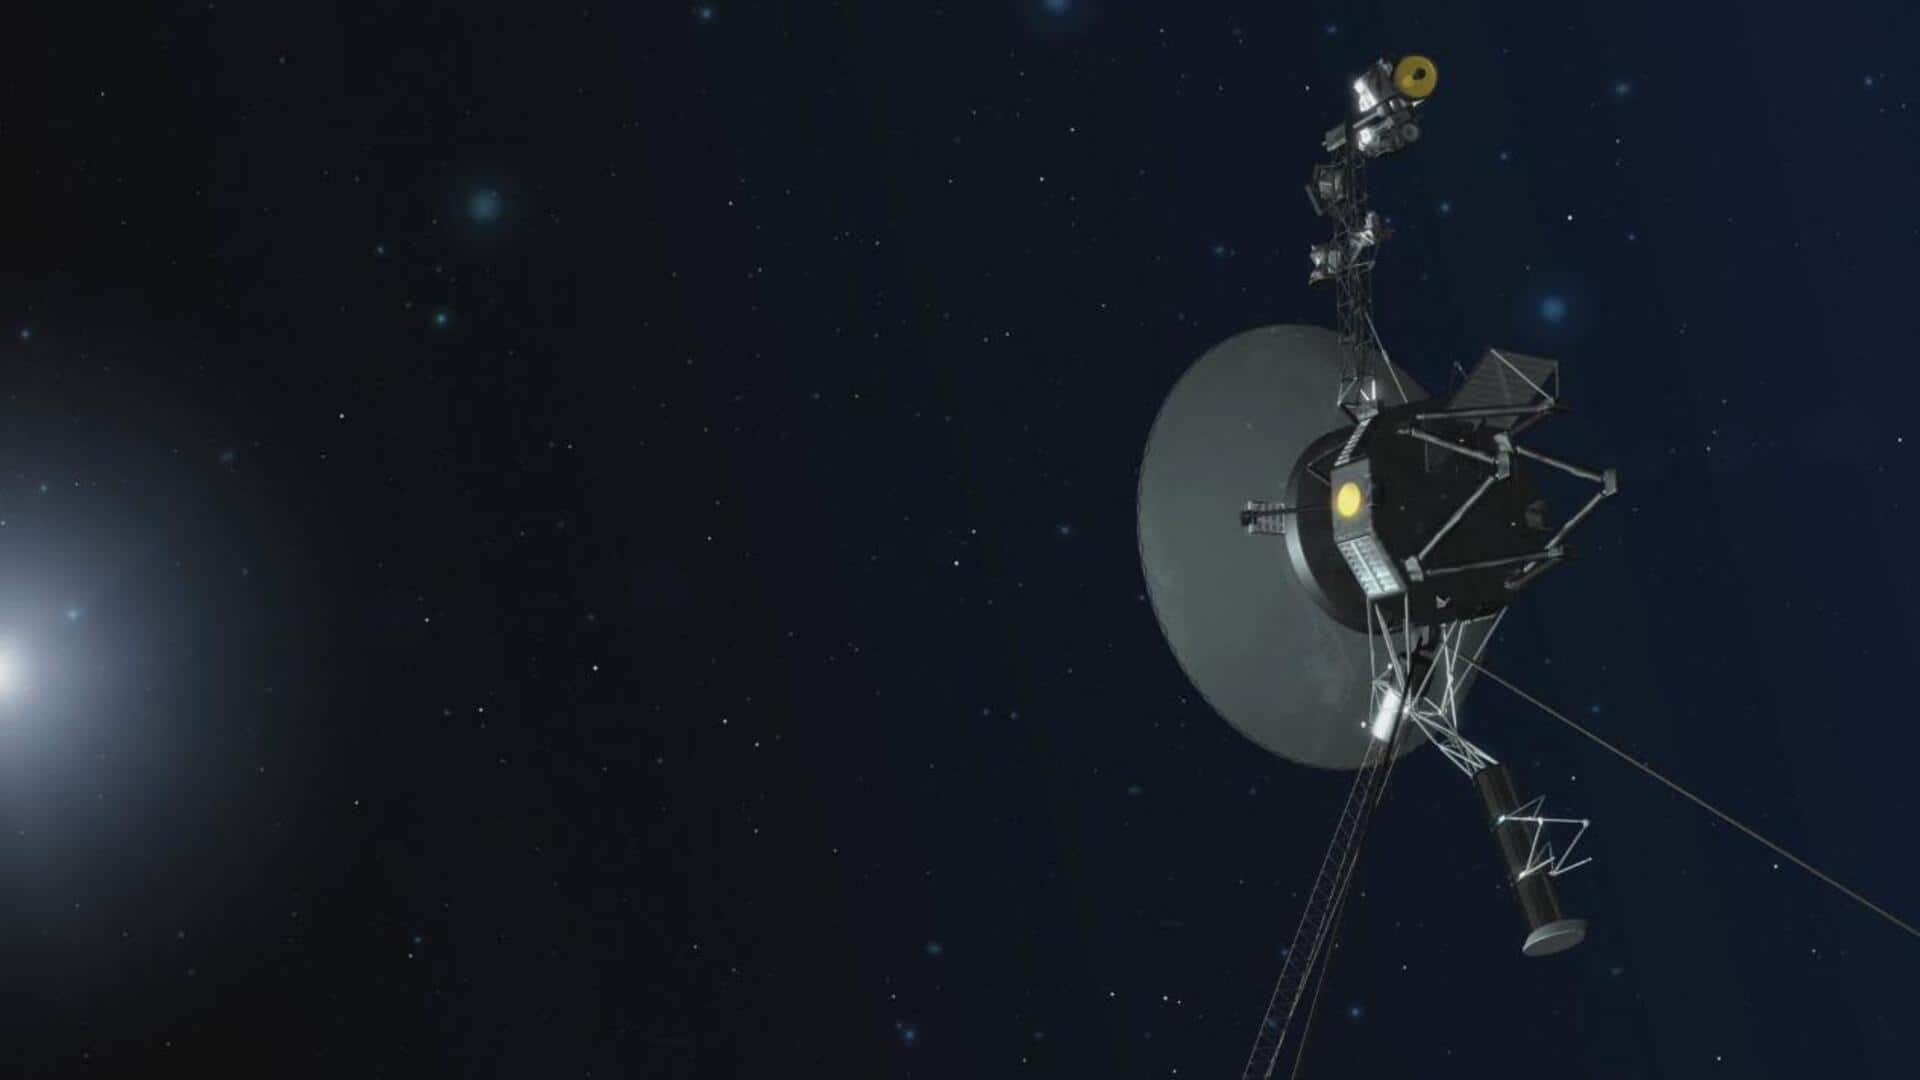 How NASA lost and regained signal from Voyager 2 spacecraft